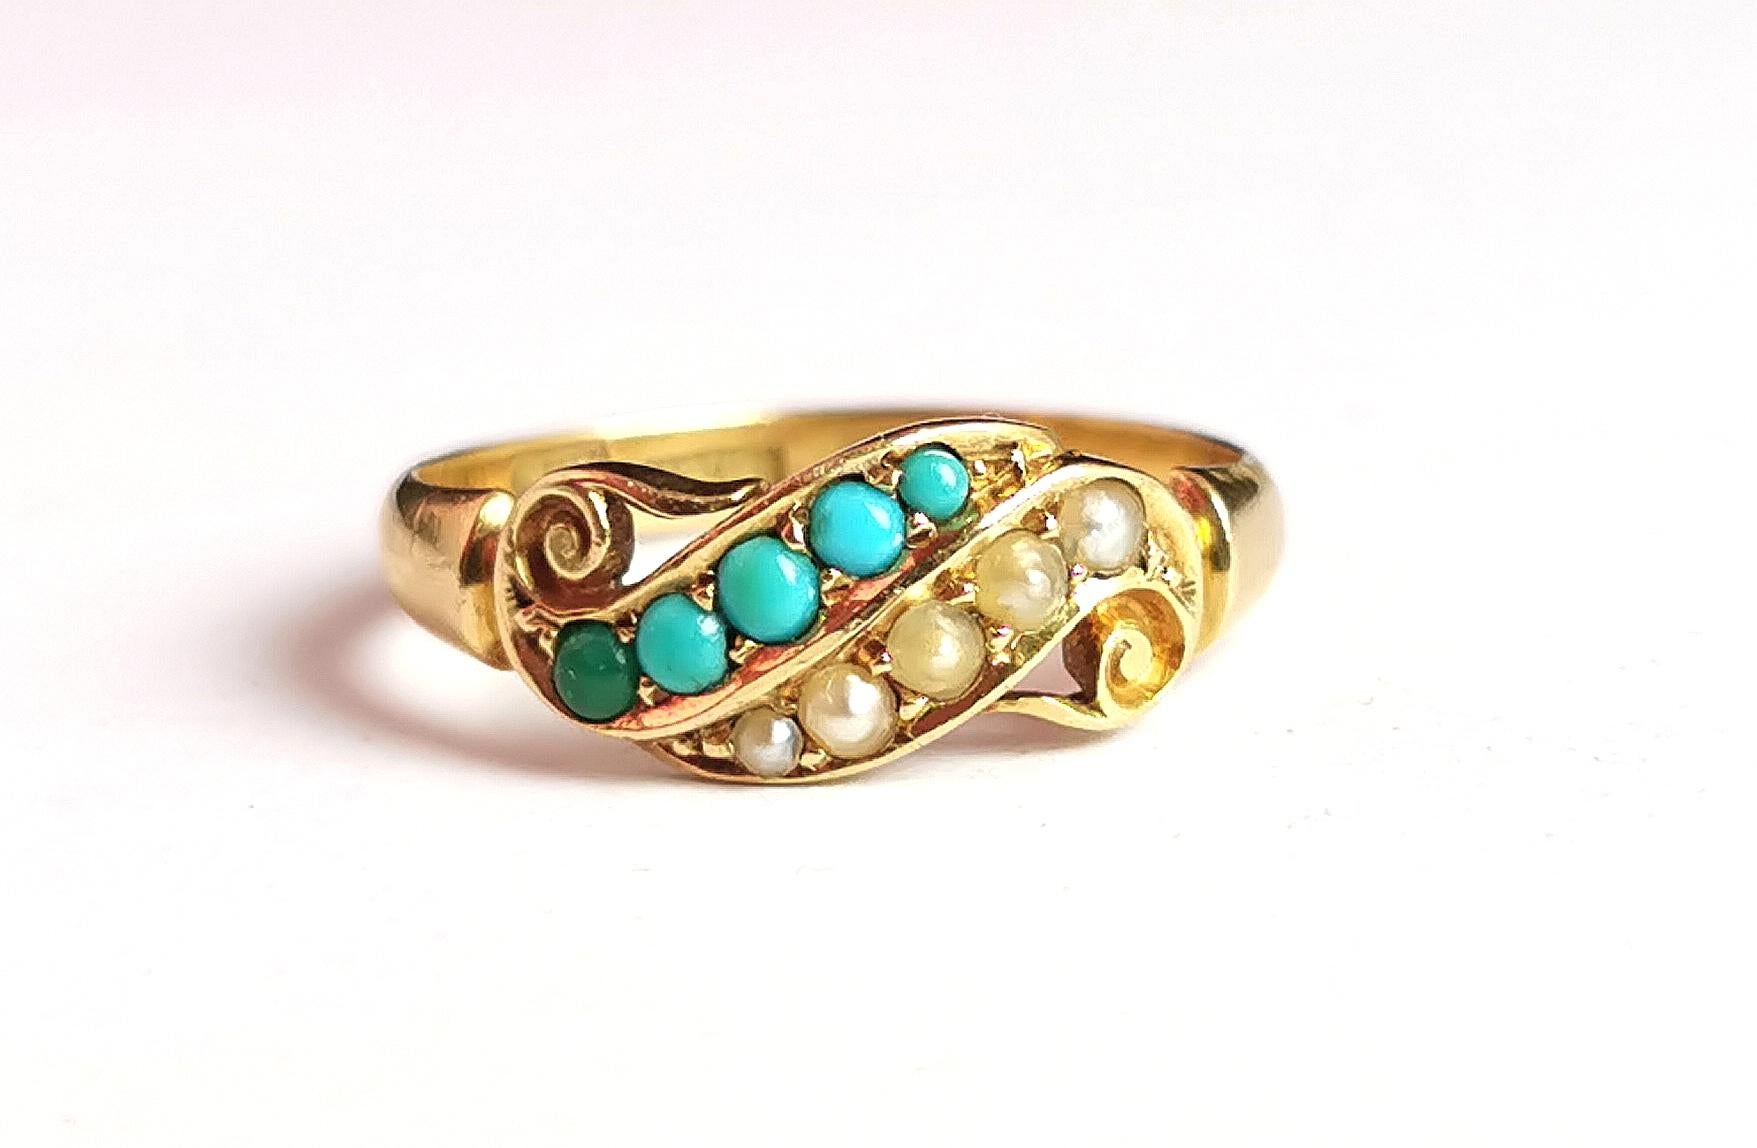 Antique Victorian Turquoise and Pearl Ring, 18k Yellow Gold 11